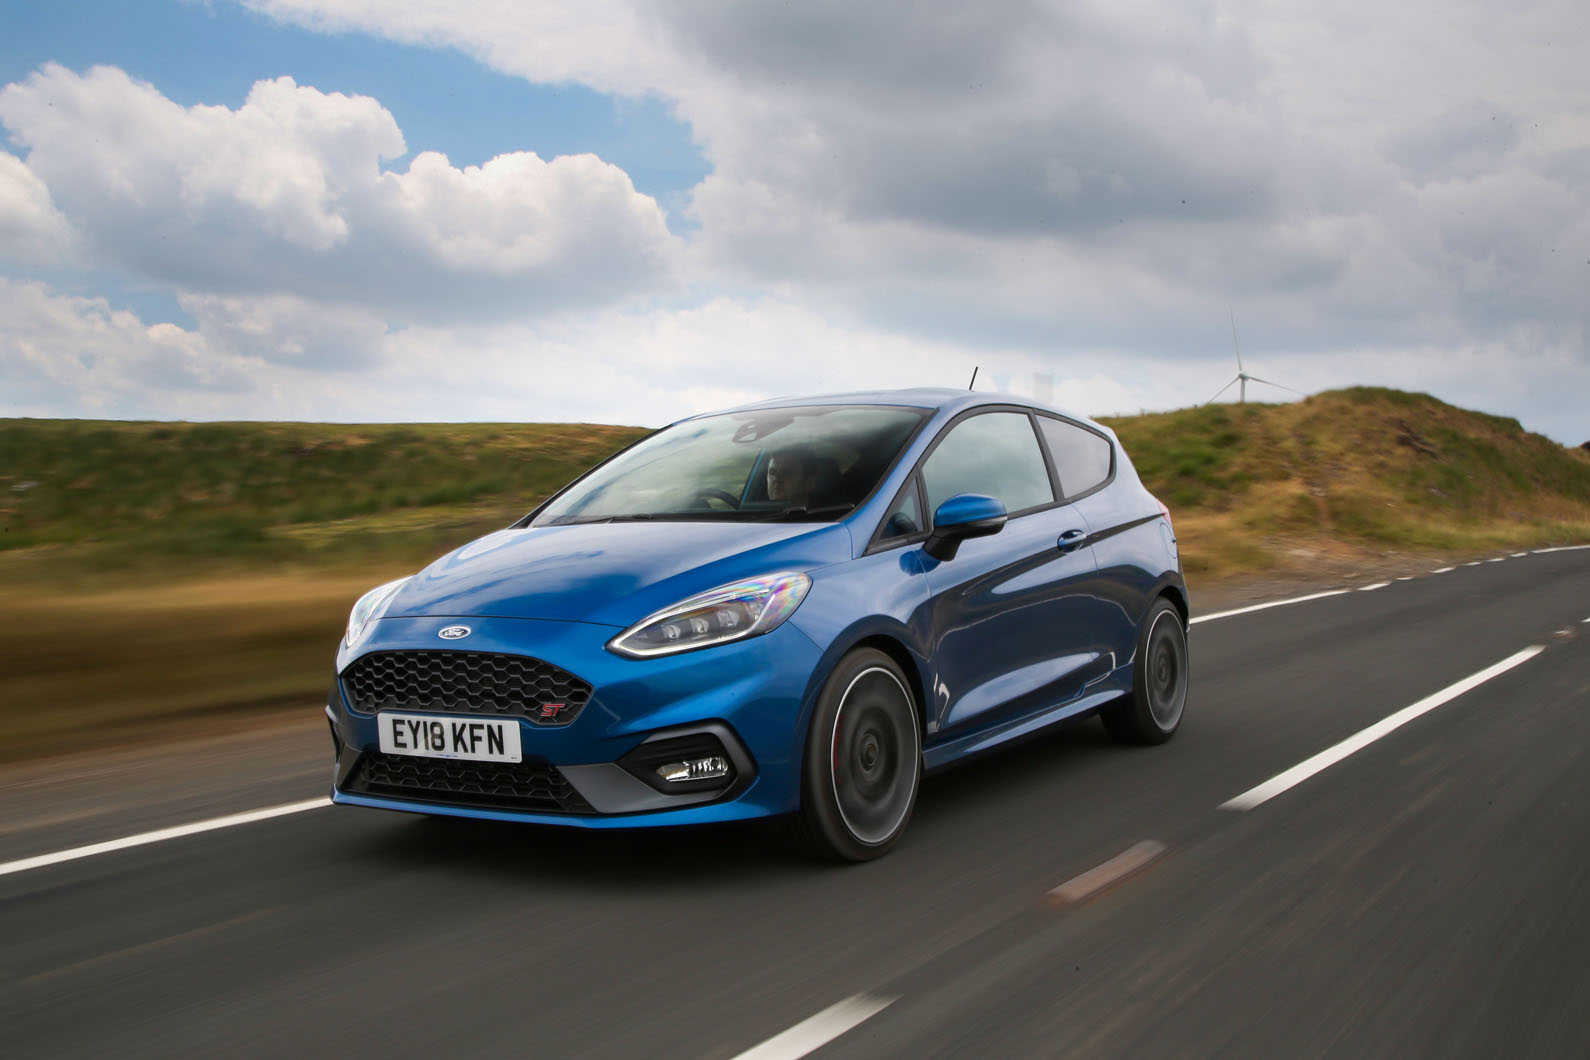 Ford Fiesta ST 2018 road test review hero front